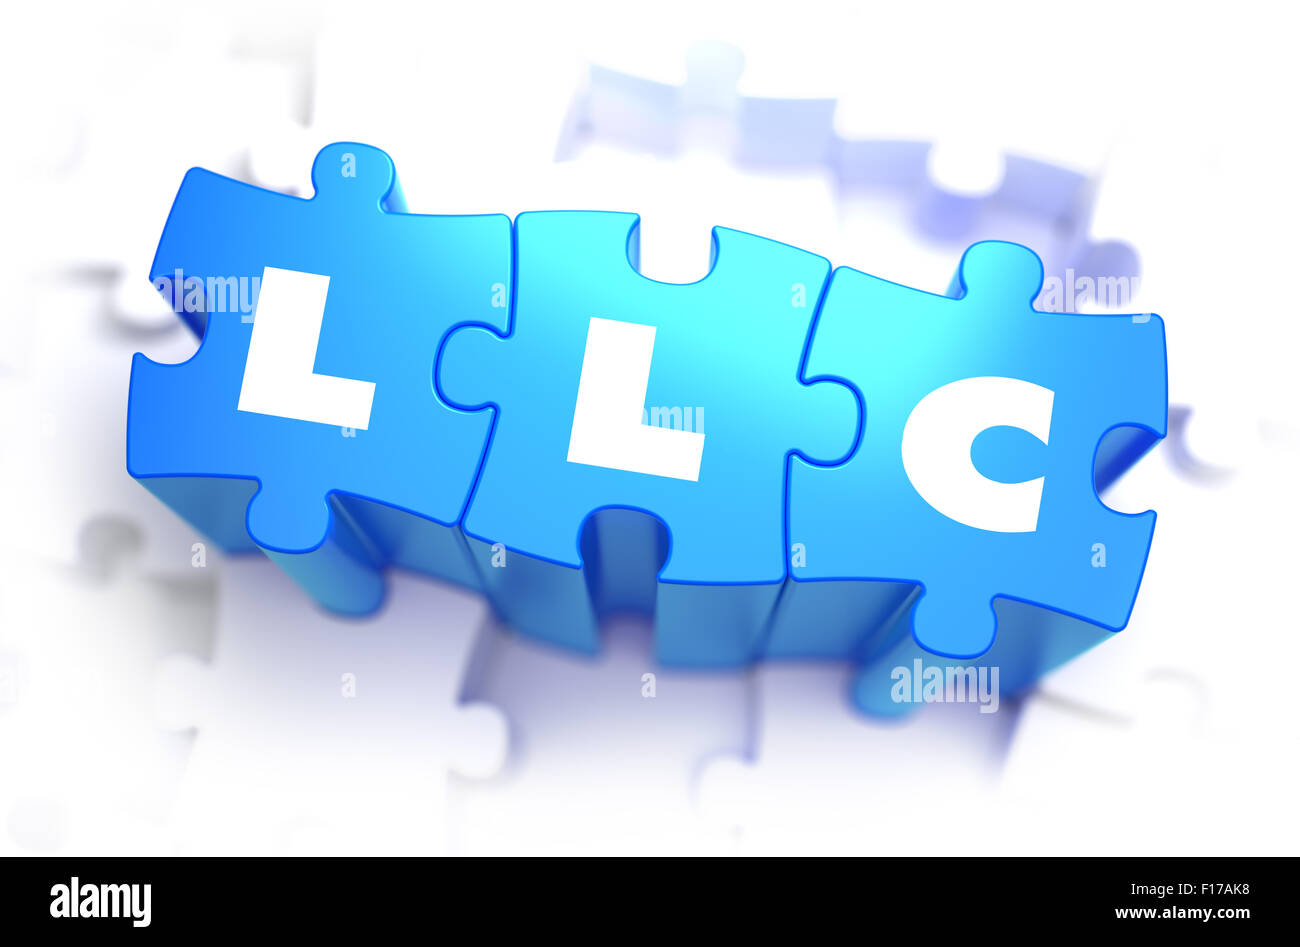 LLC - Limited Legal Liability - White Word on Blue Puzzles on White Background. 3D Render. Stock Photo